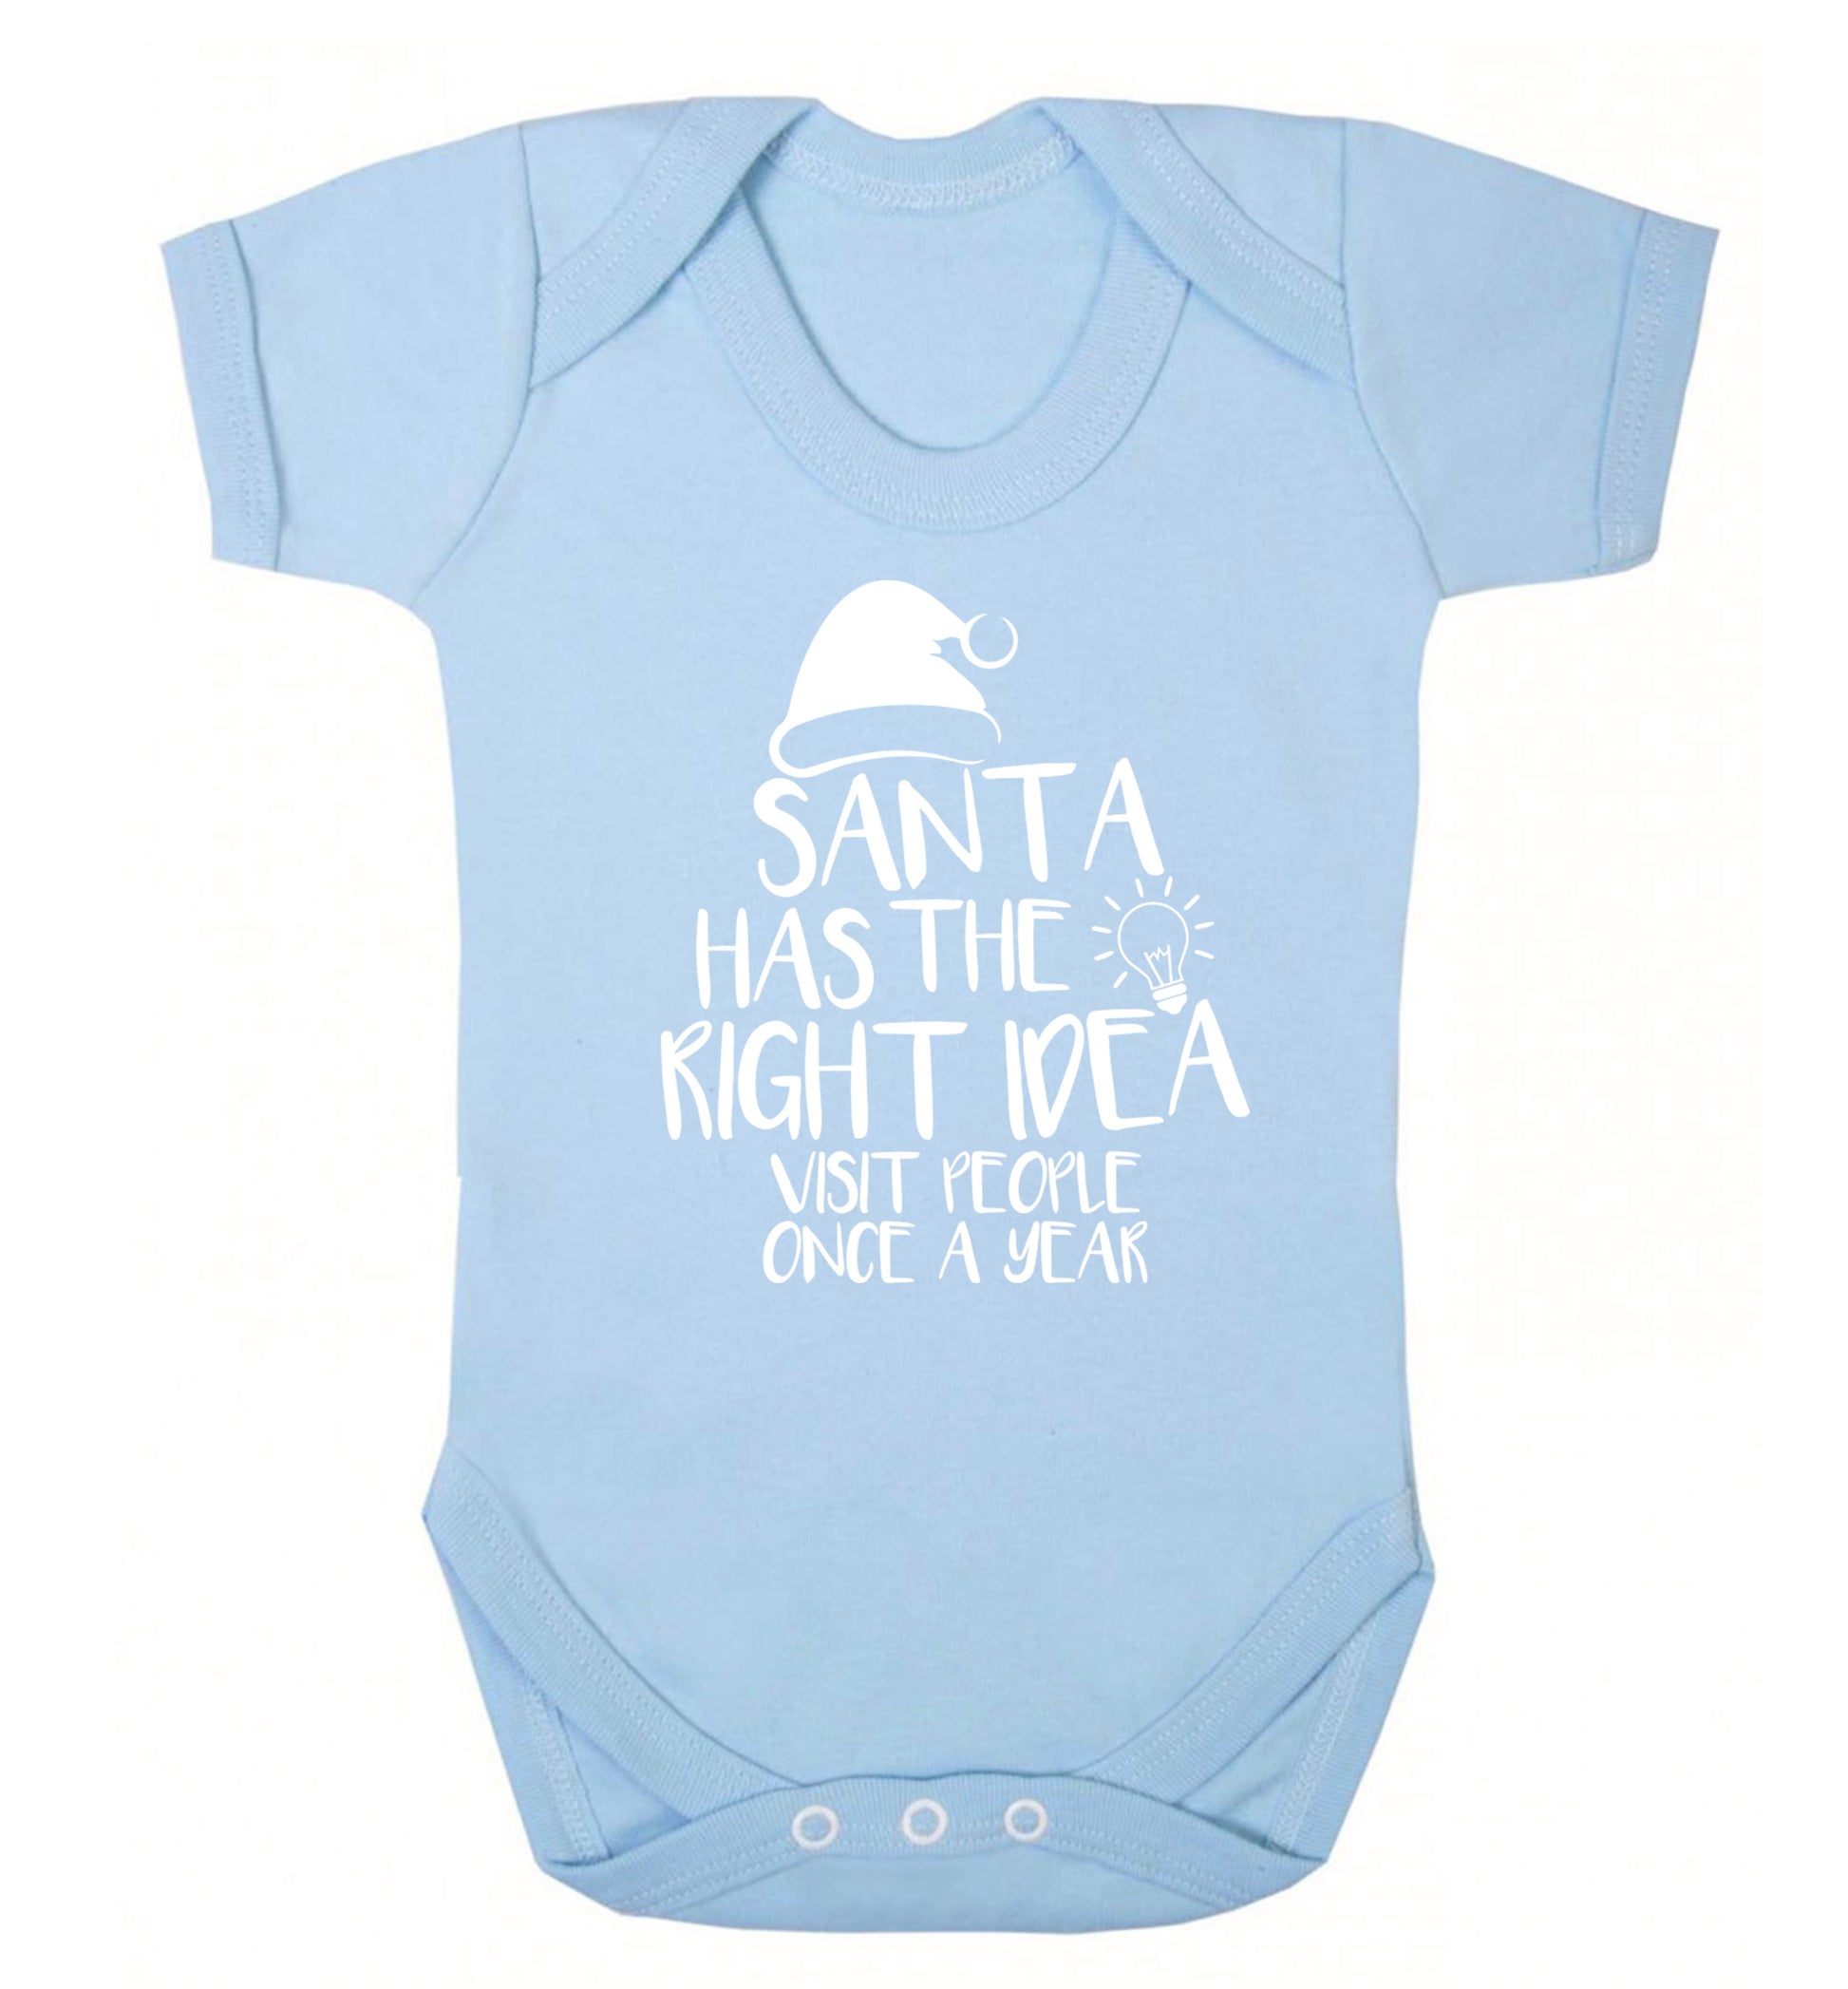 Santa has the right idea visit people once a year Baby Vest pale blue 18-24 months